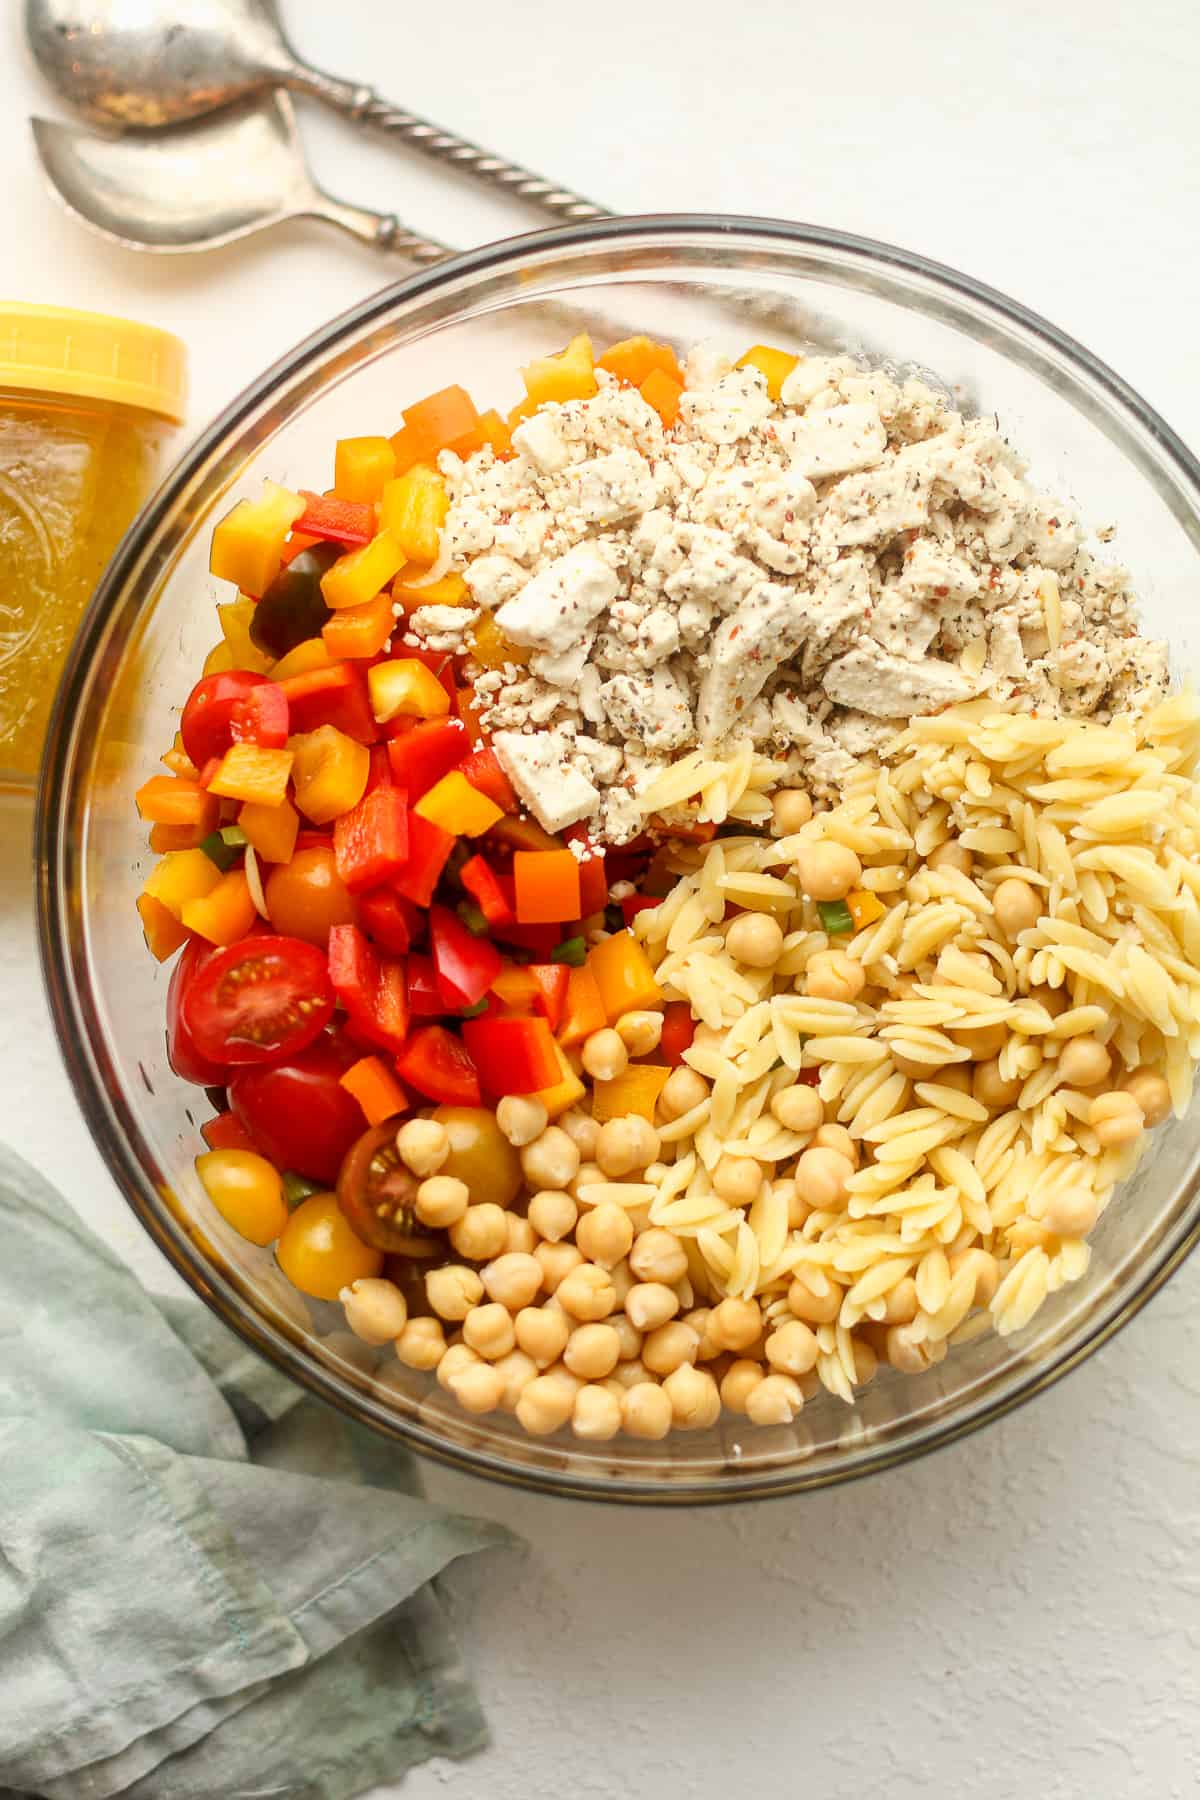 A bowl of the pasta salad ingredients, divided by ingredient.